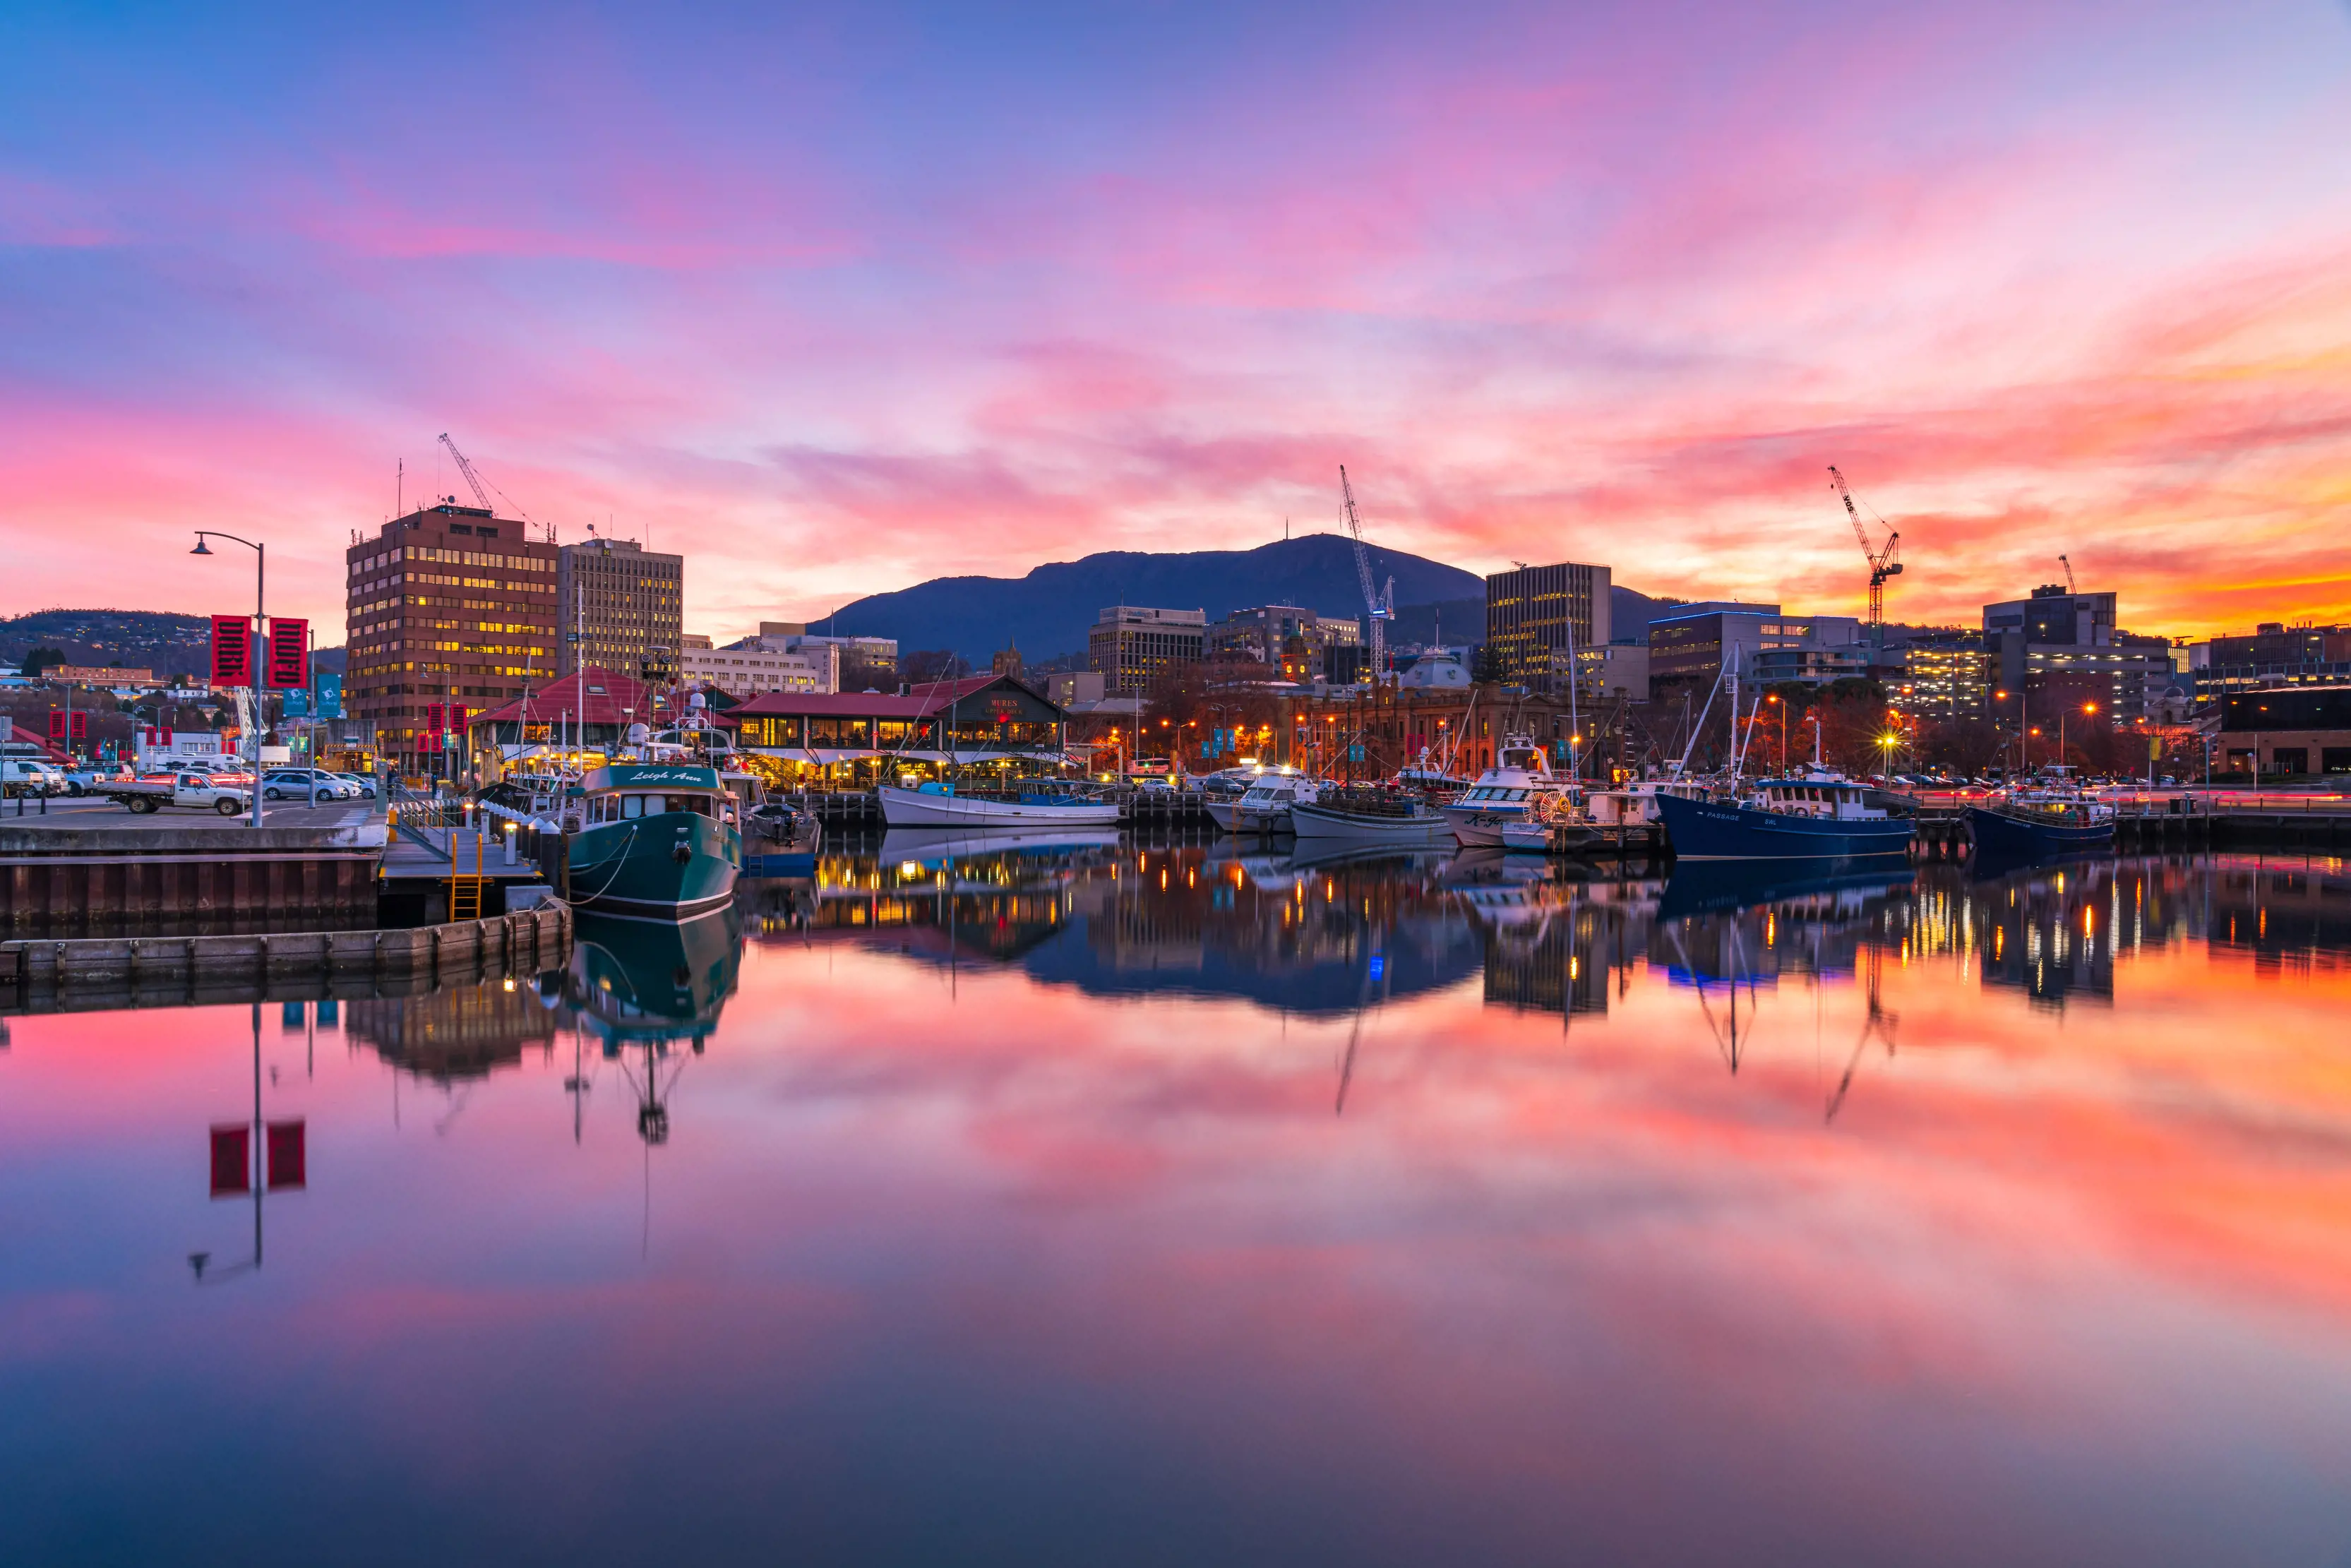 Hobart waterfront at sunset. Hues of pink, purple and orange hitting the skyline and water 